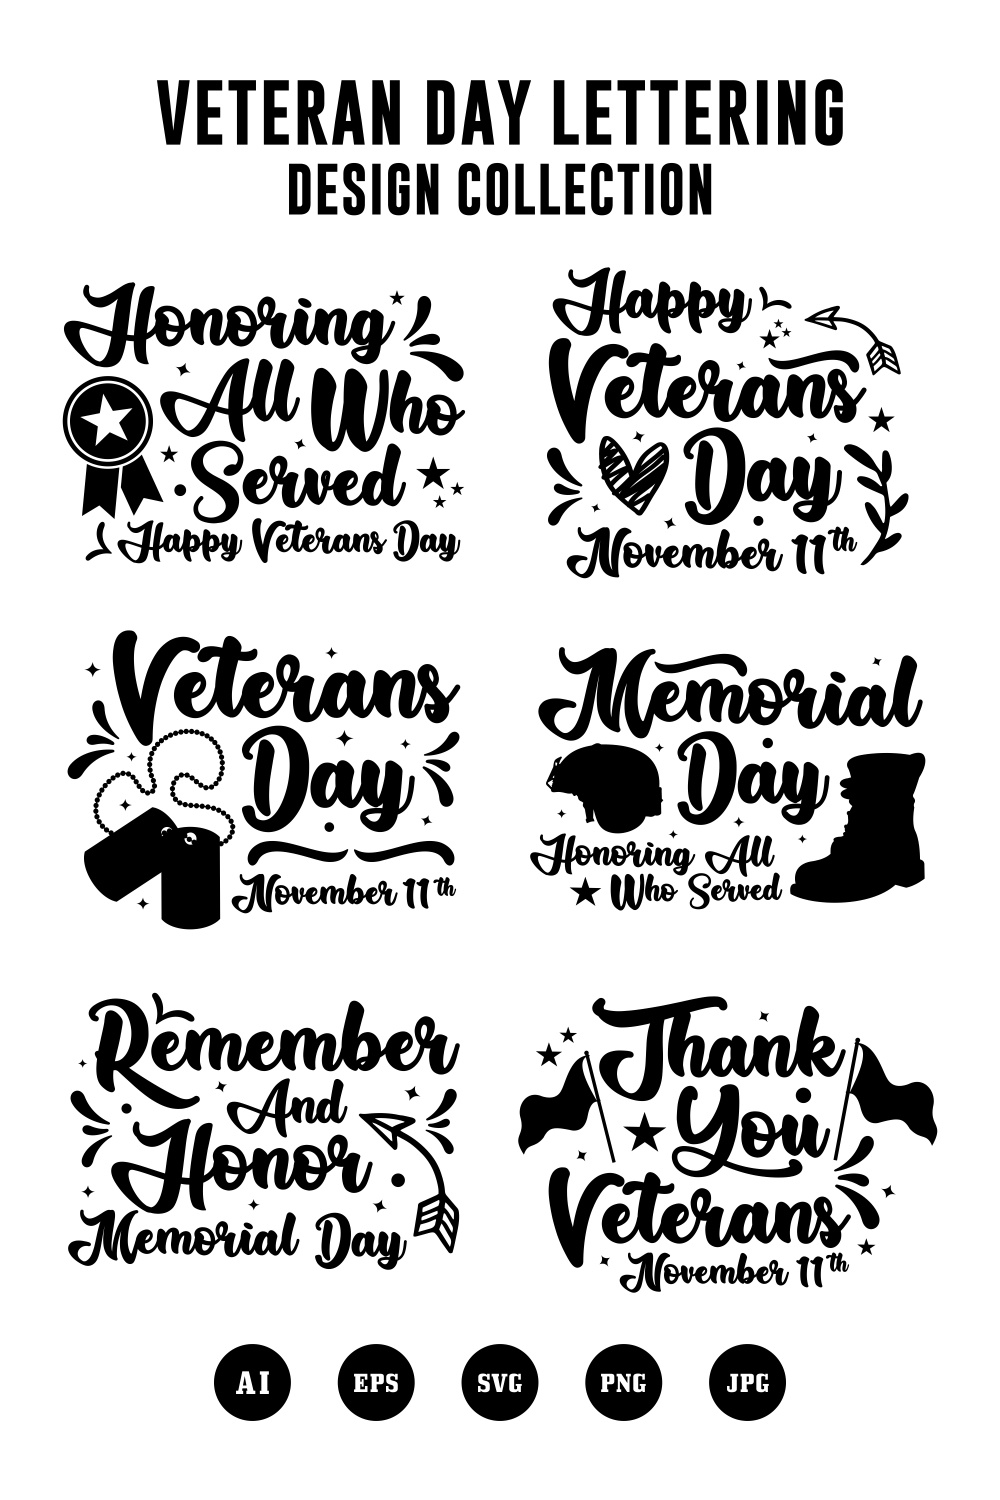 Set Veteran day lettering design collection - $5 pinterest preview image.